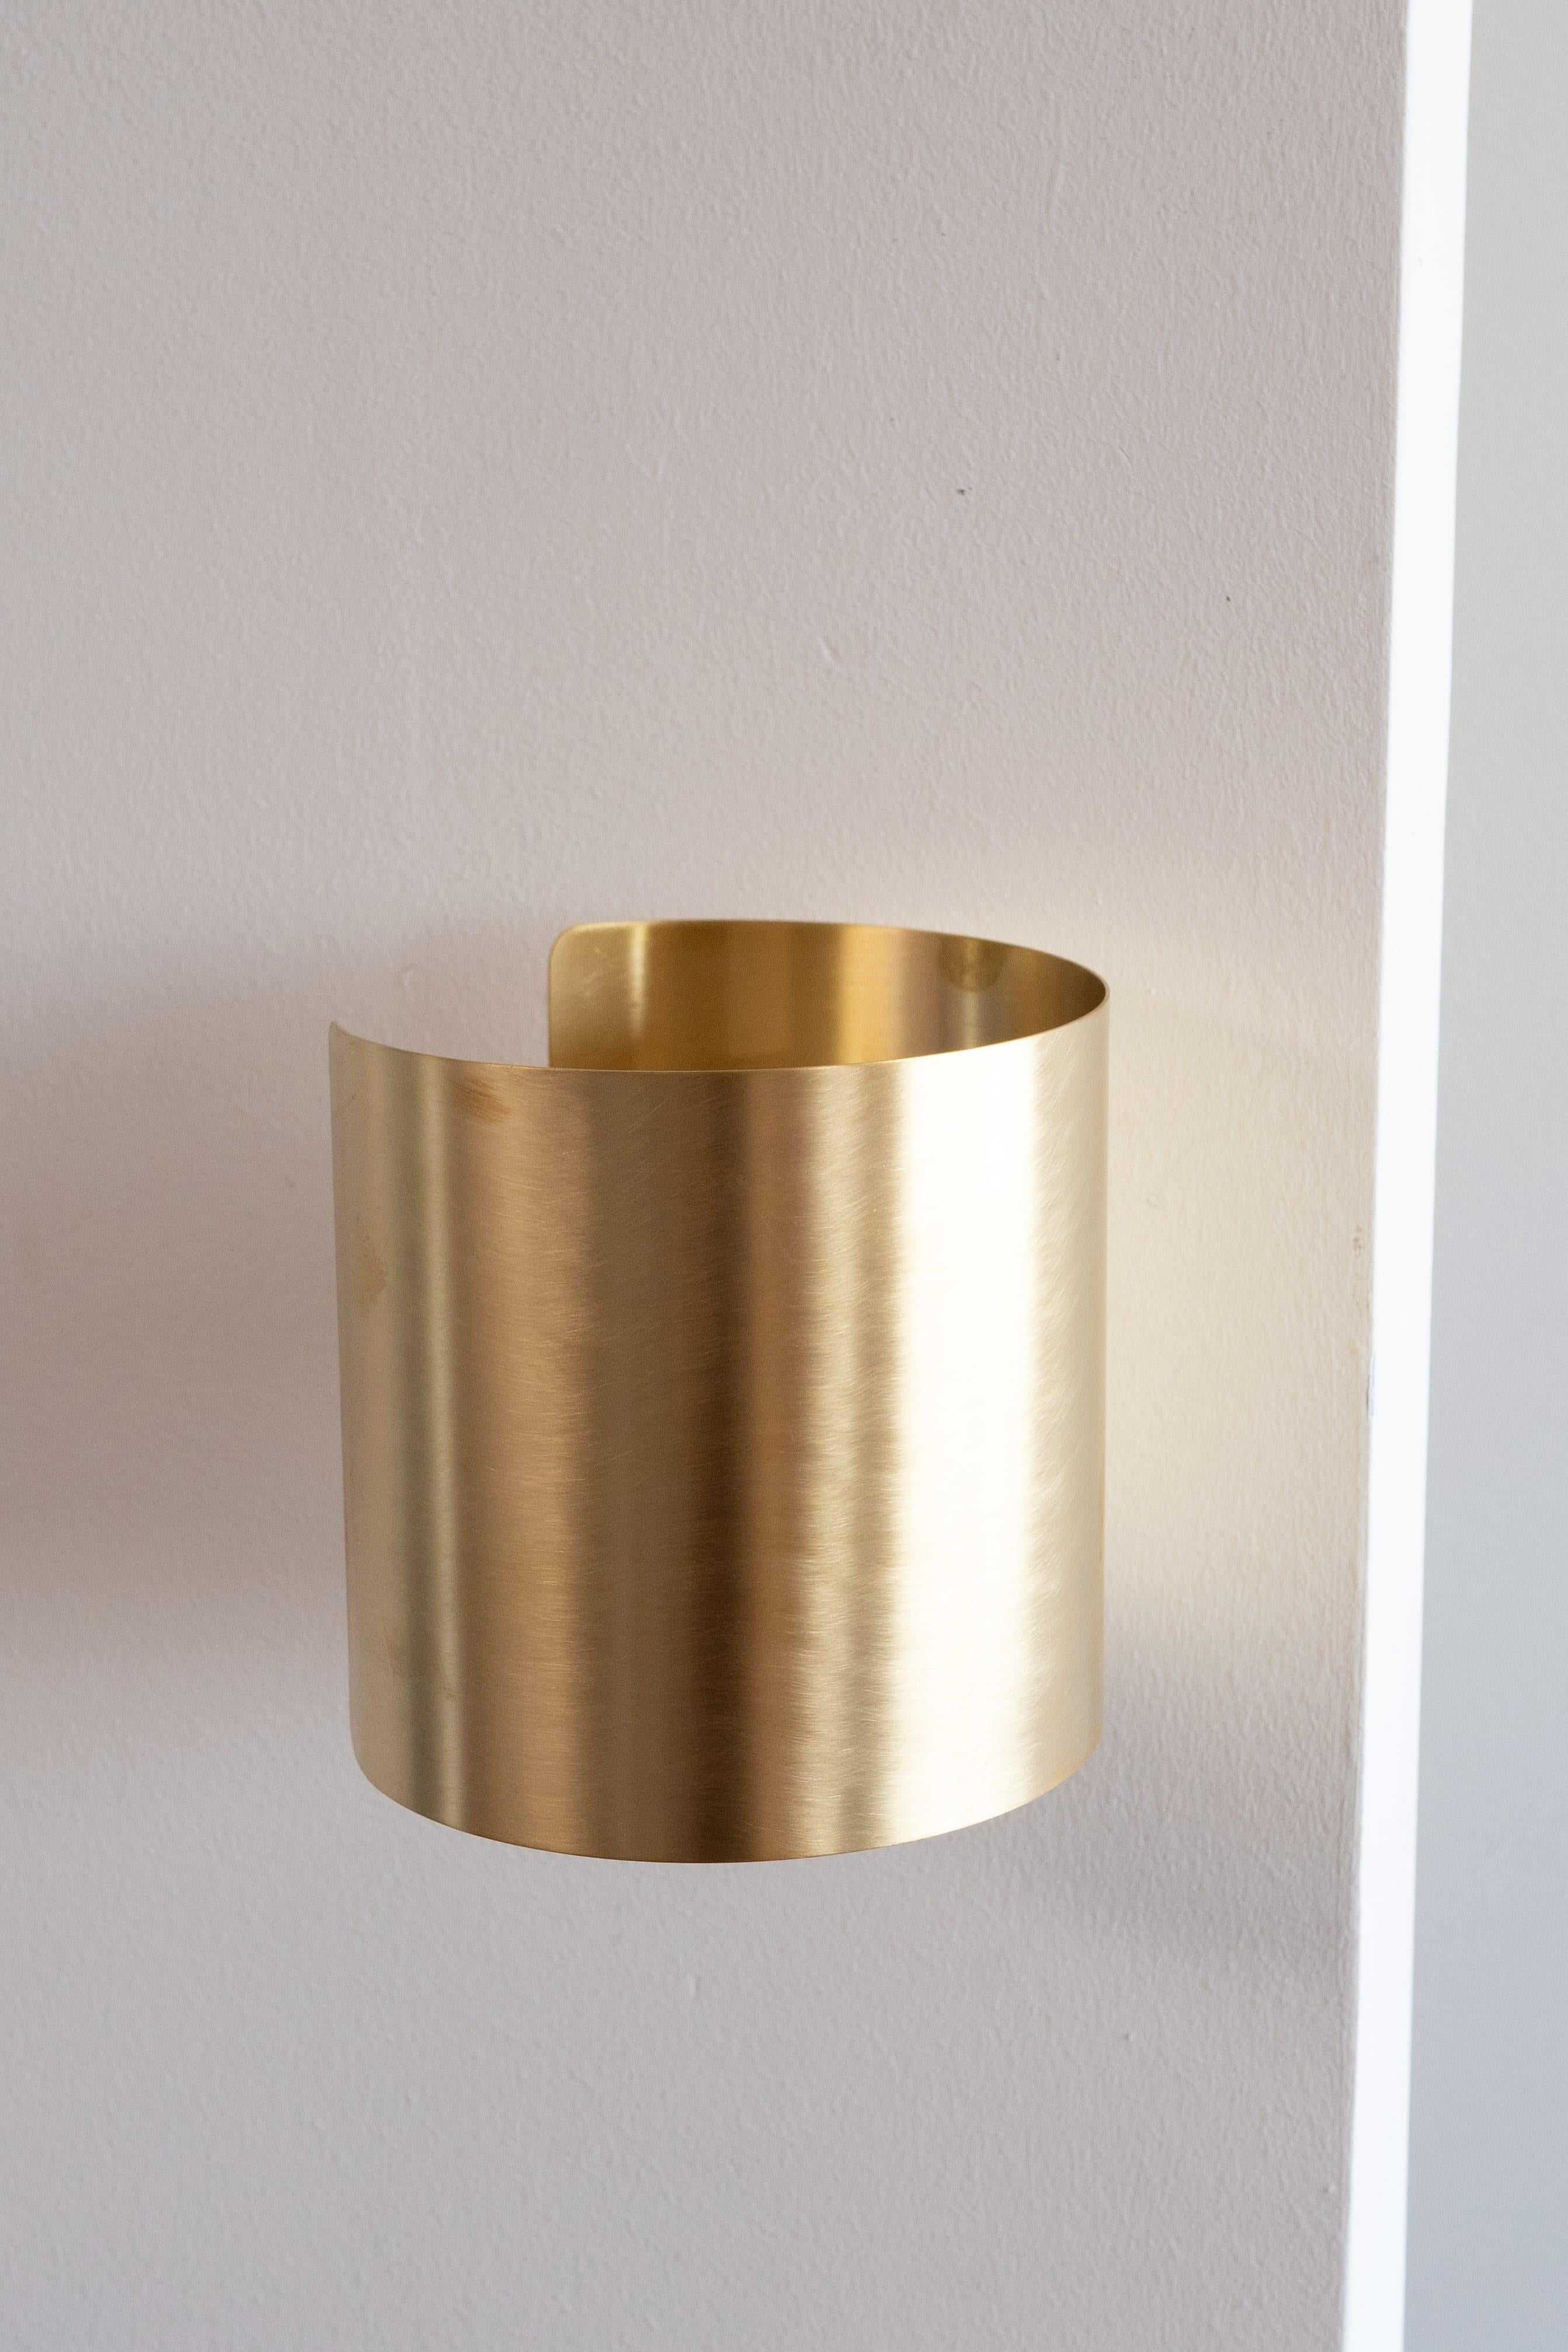 Natural Brass Contemporary-Modern Decorative Wall Light Handcrafted in Italy For Sale 5